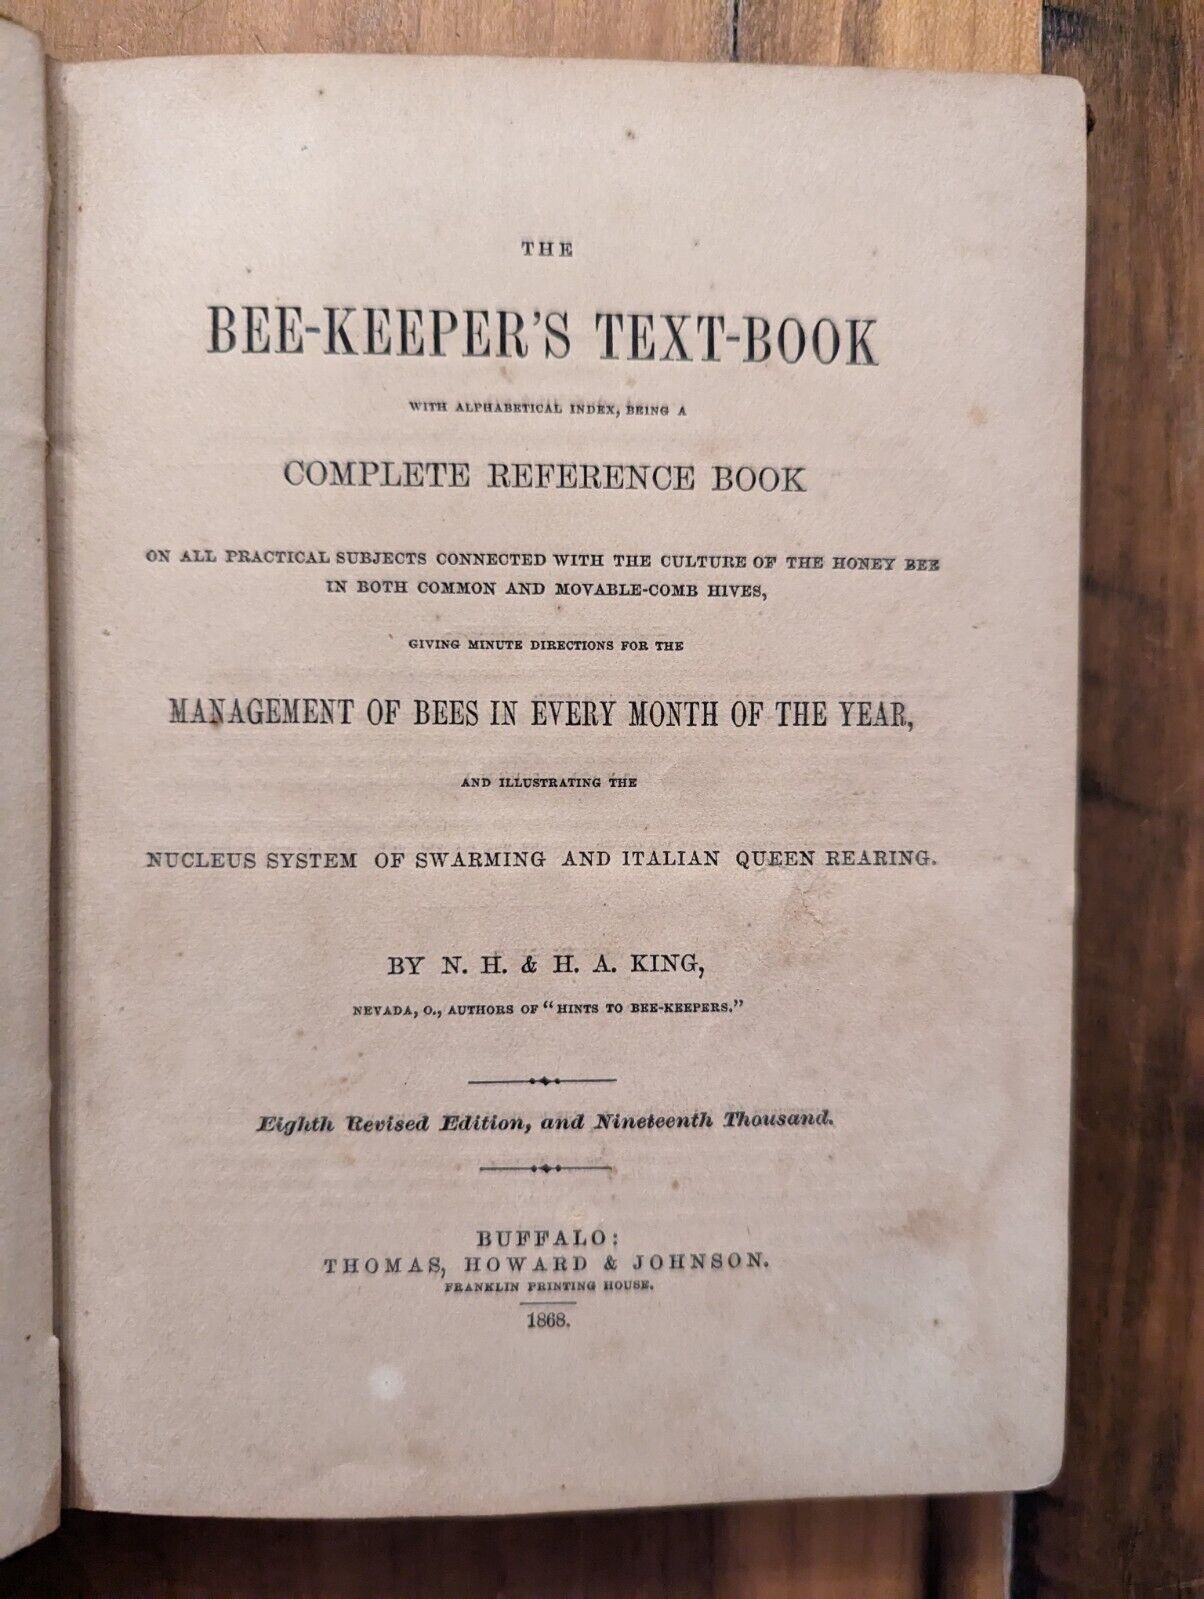 The Bee-keepers Textbook(1868) RARE